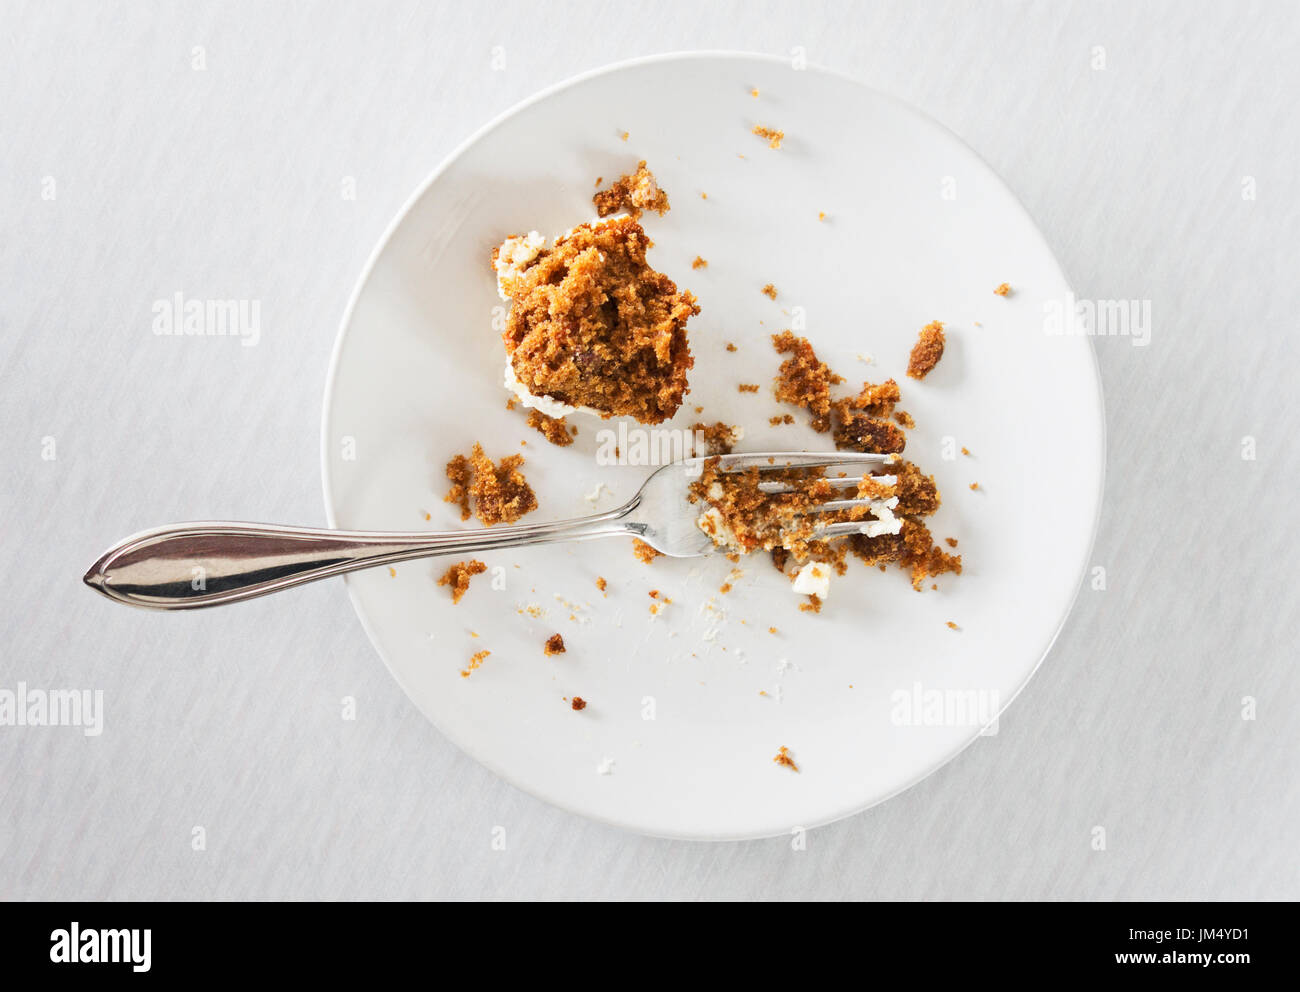 Half eaten cake on white plate with fork. Stock Photo